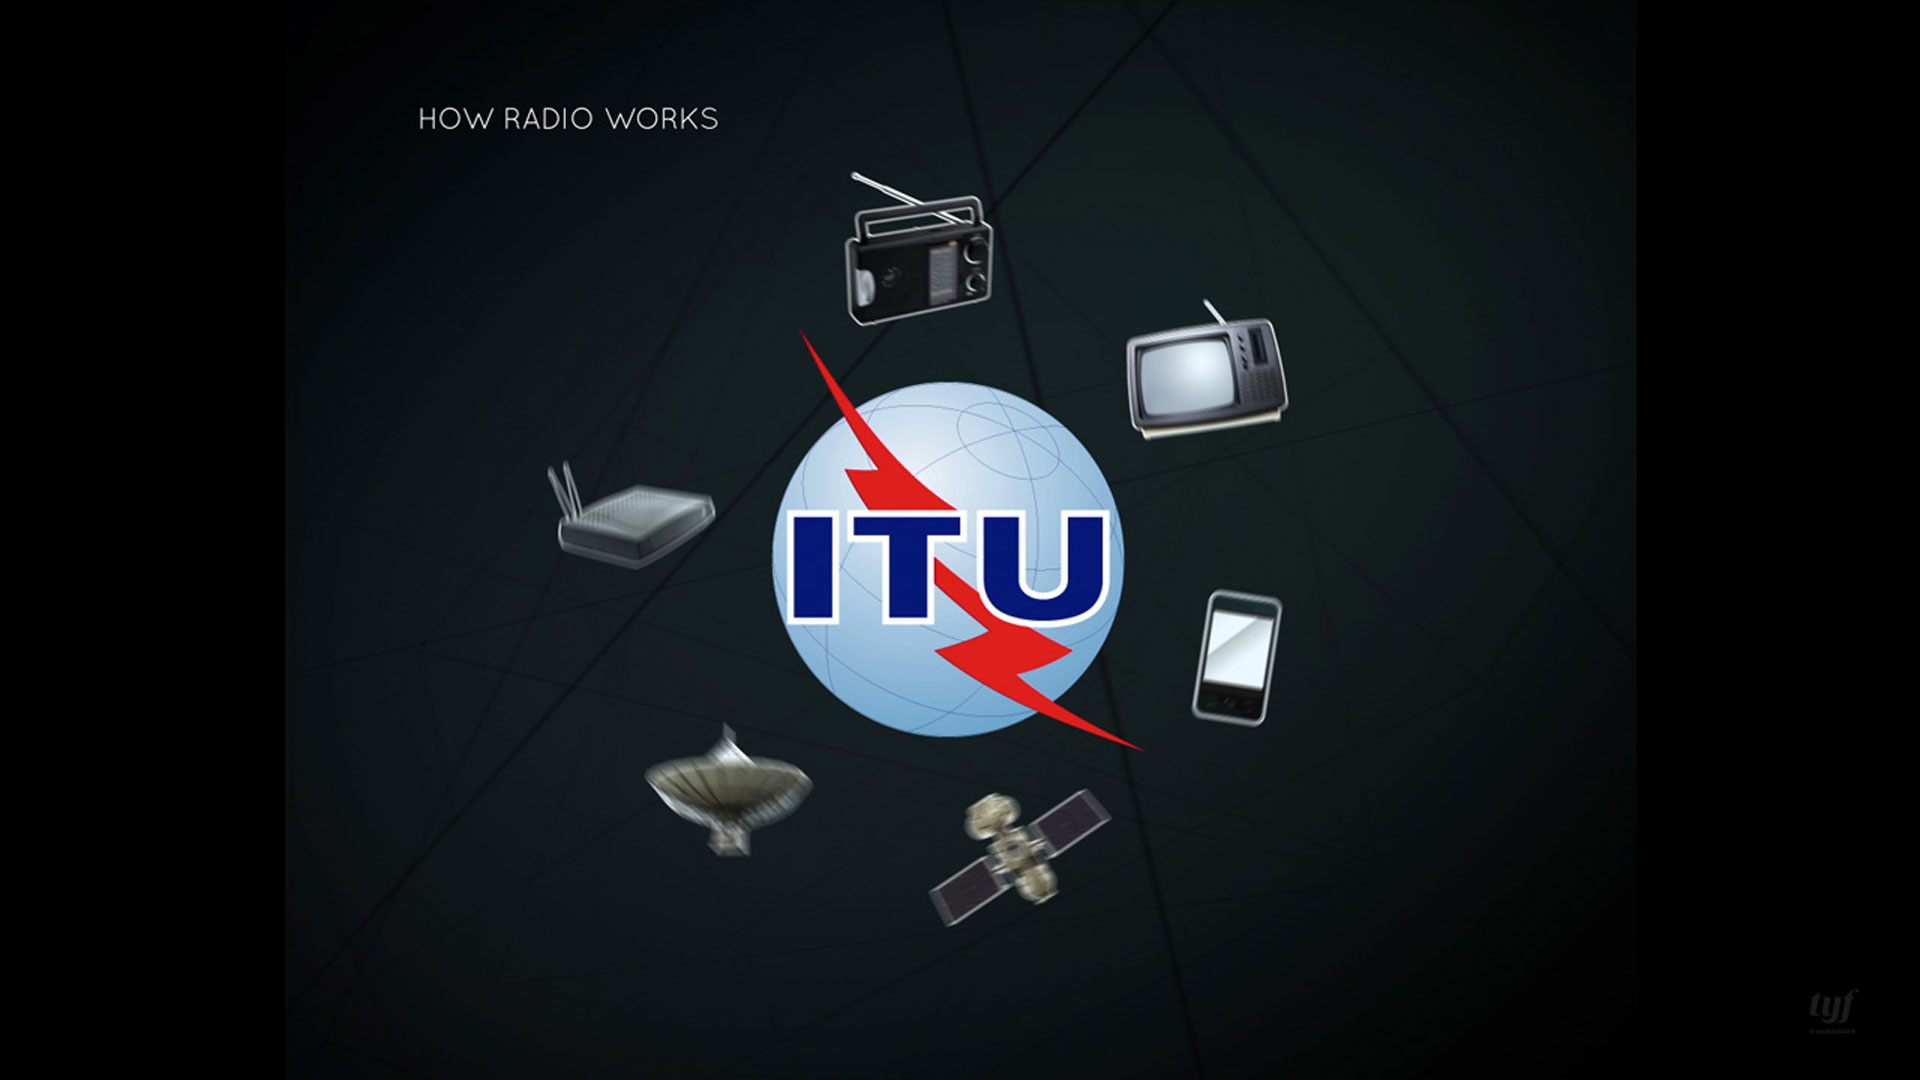 ITU How Does It Works